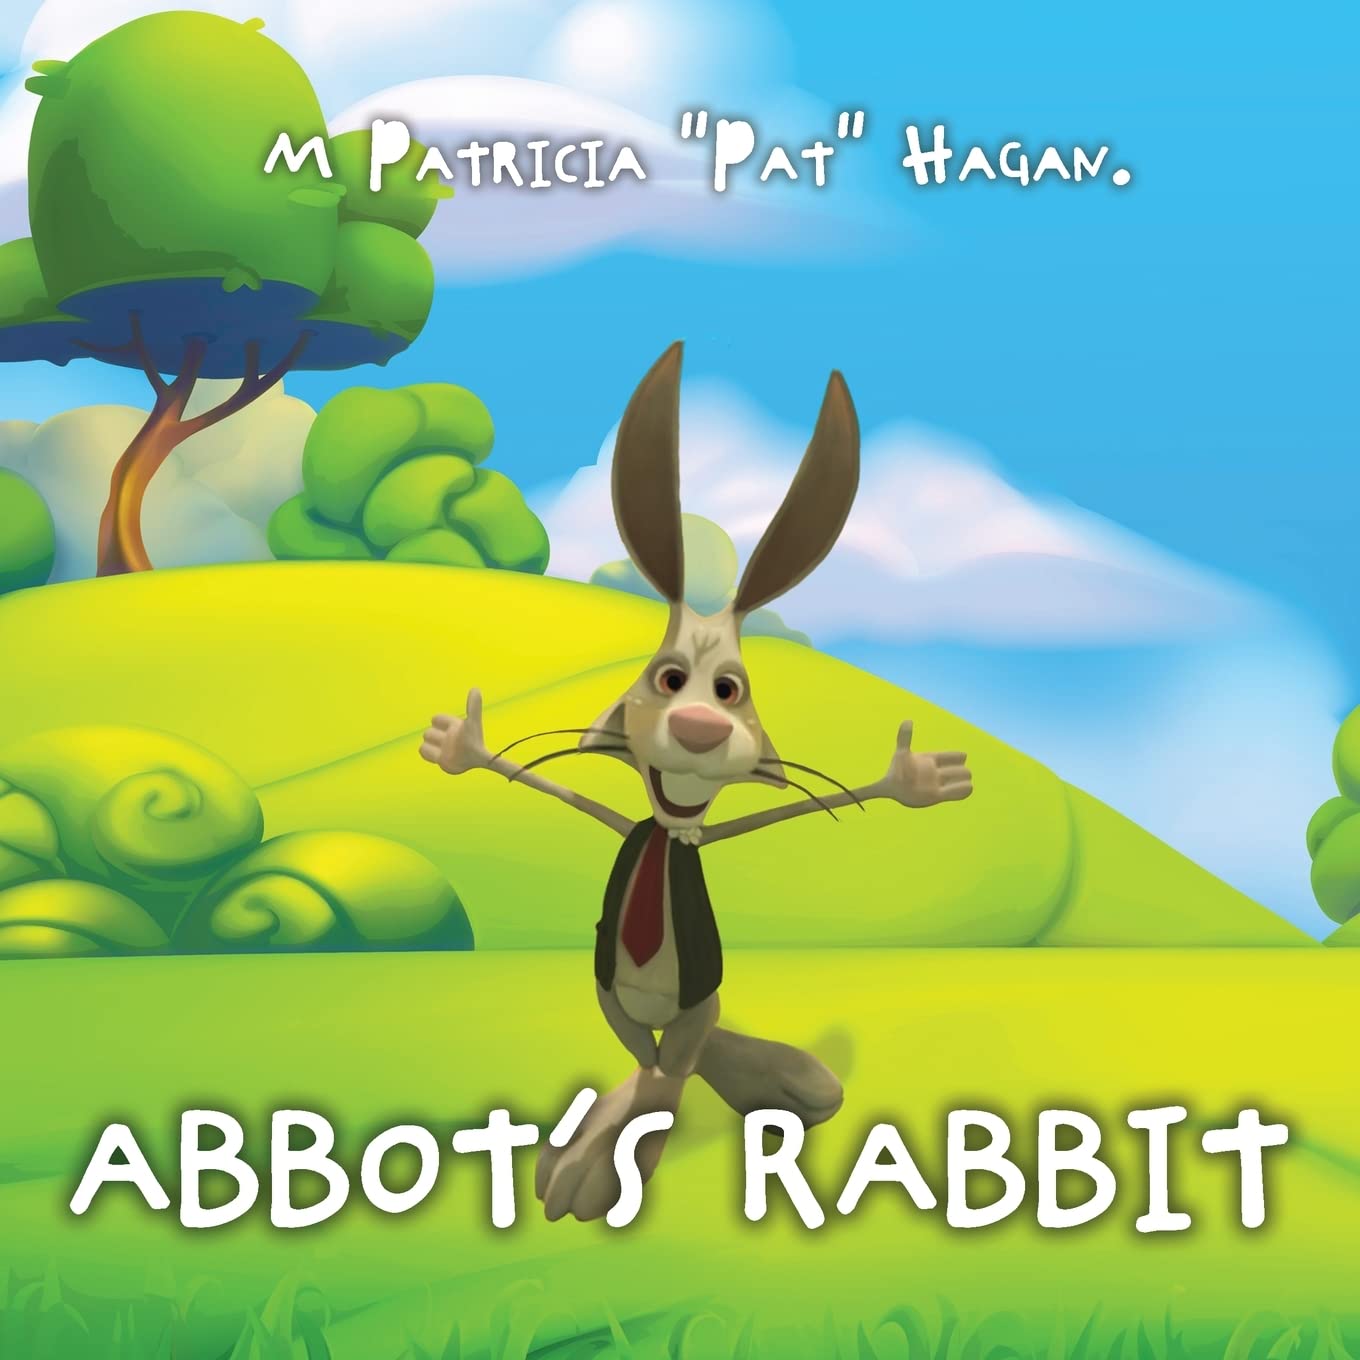 M Patricia 'Pat' Hagan launches new children's book titled Abbot's Rabbit; published by Author’s Tranquility Press